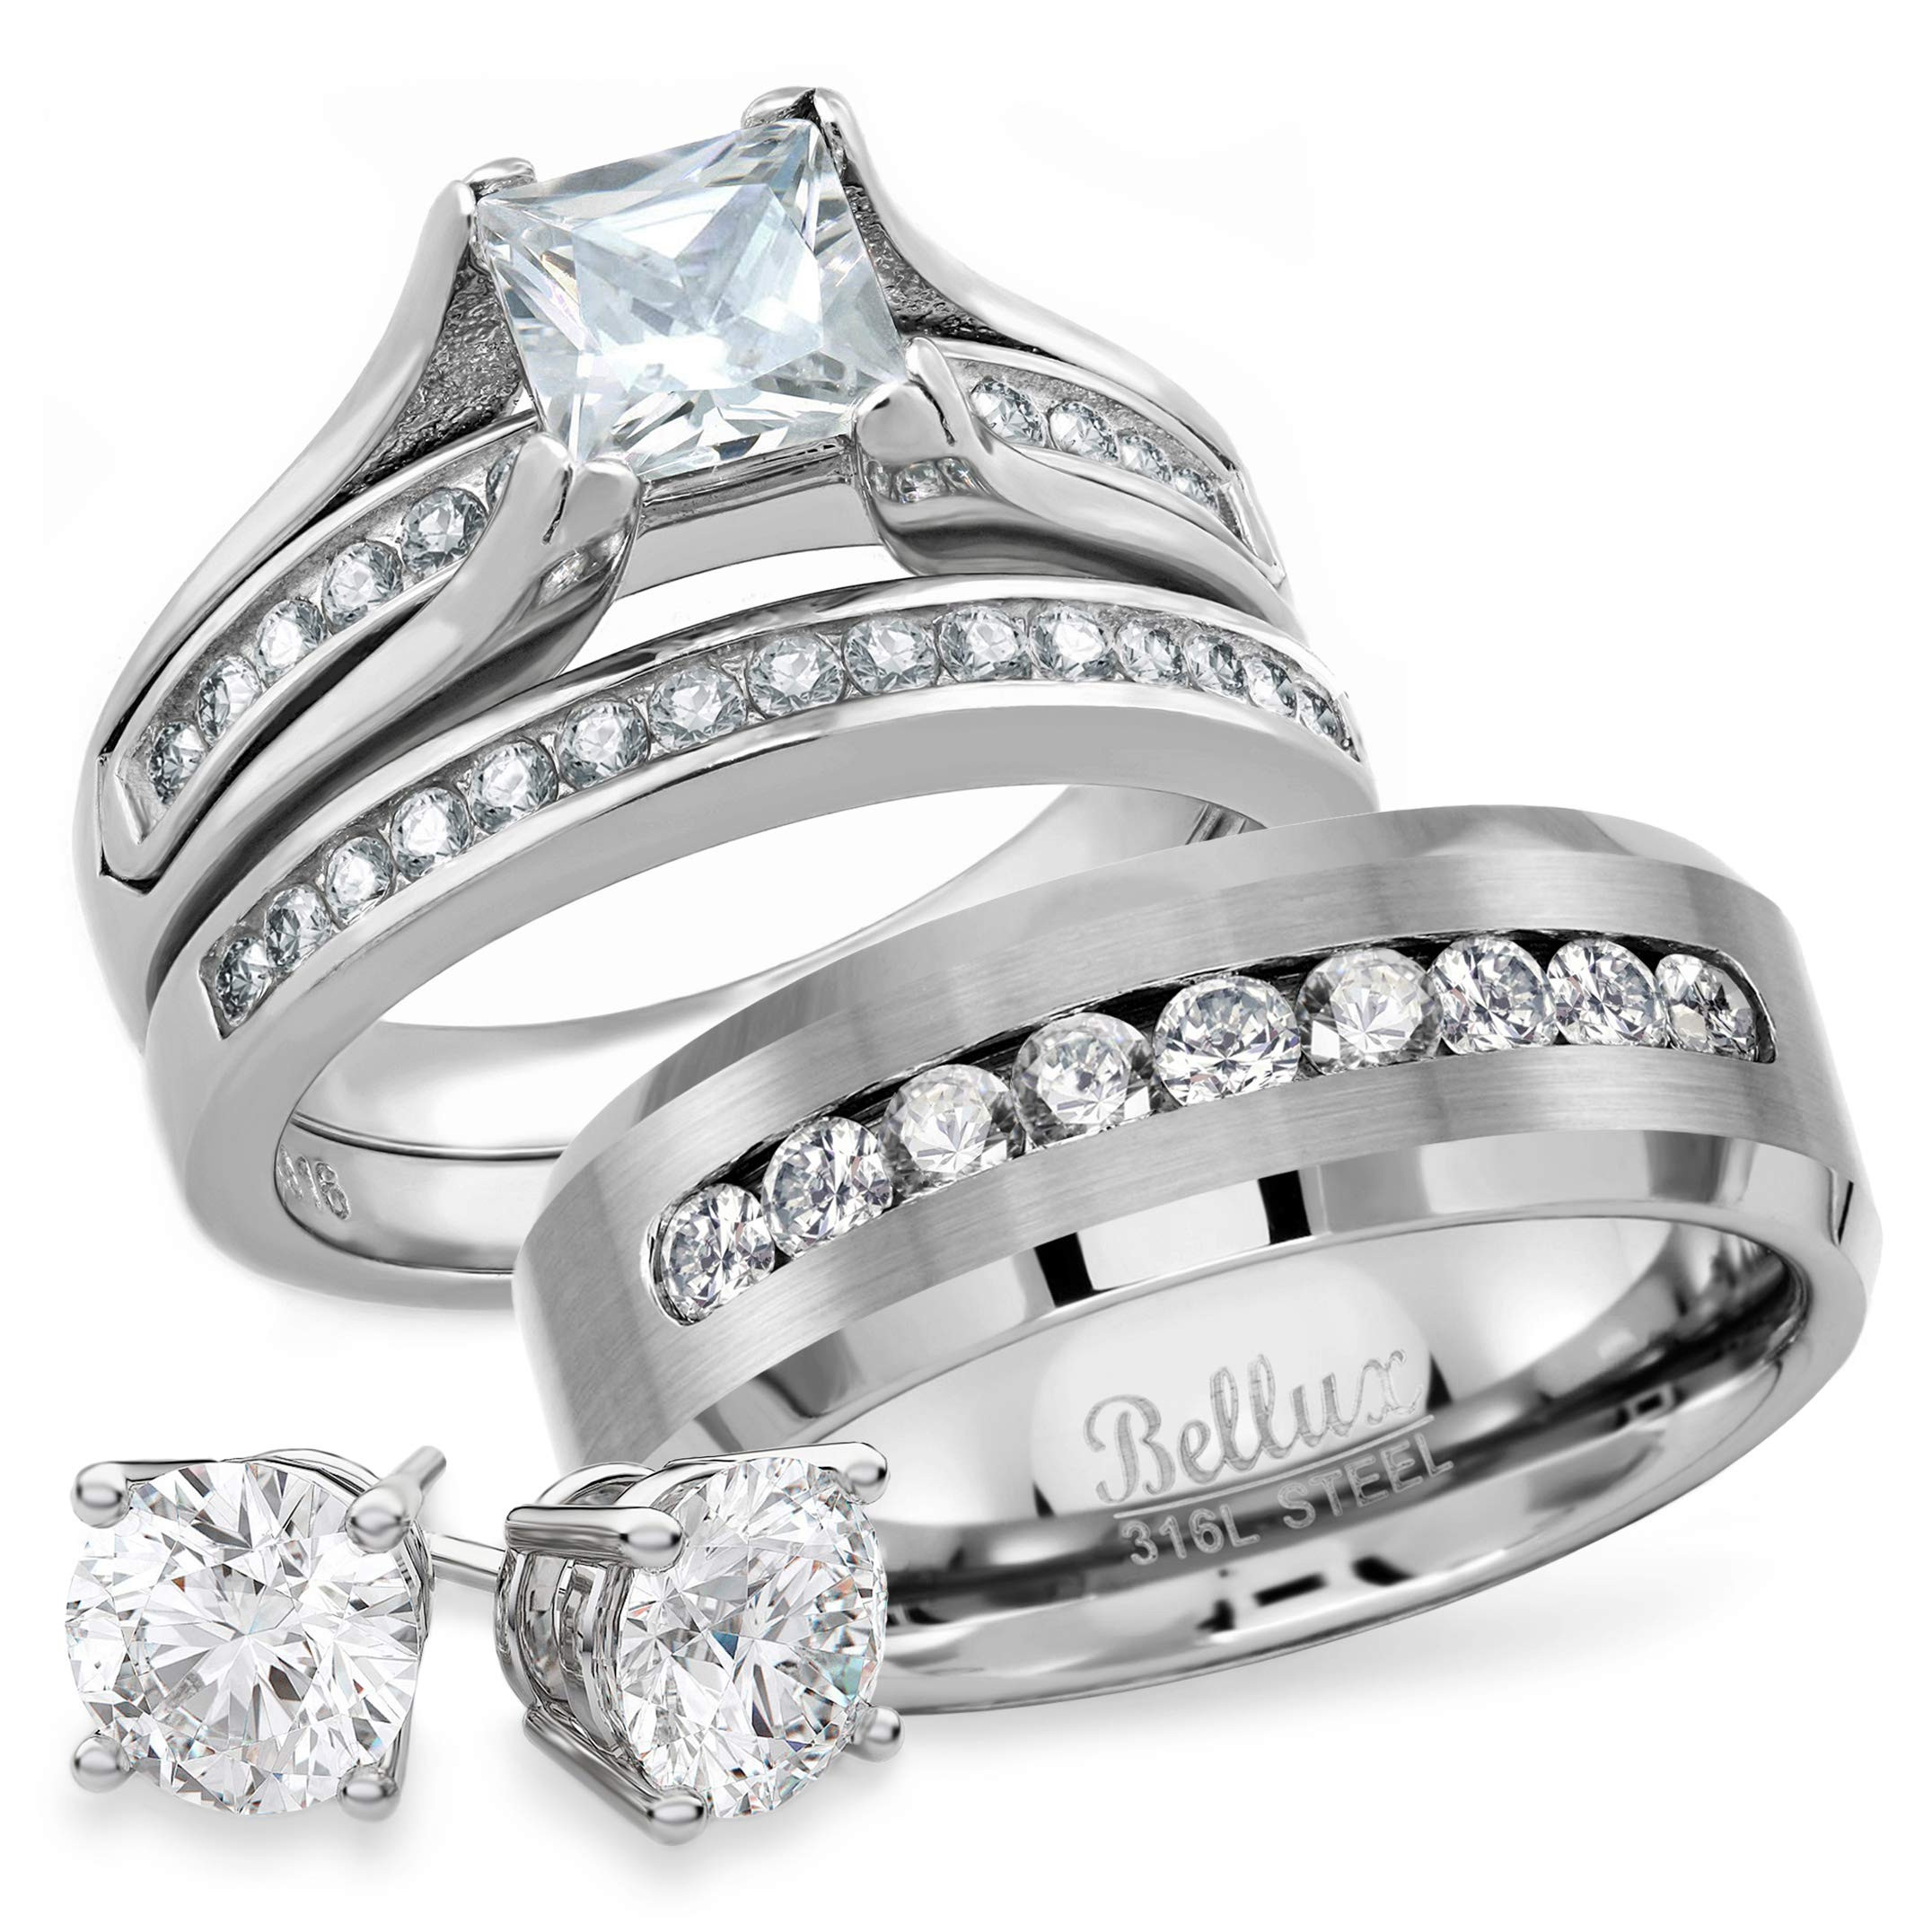 Wedding Rings Sets For Him And Her
 Bellux Style His and Hers Wedding Rings Set for Him and